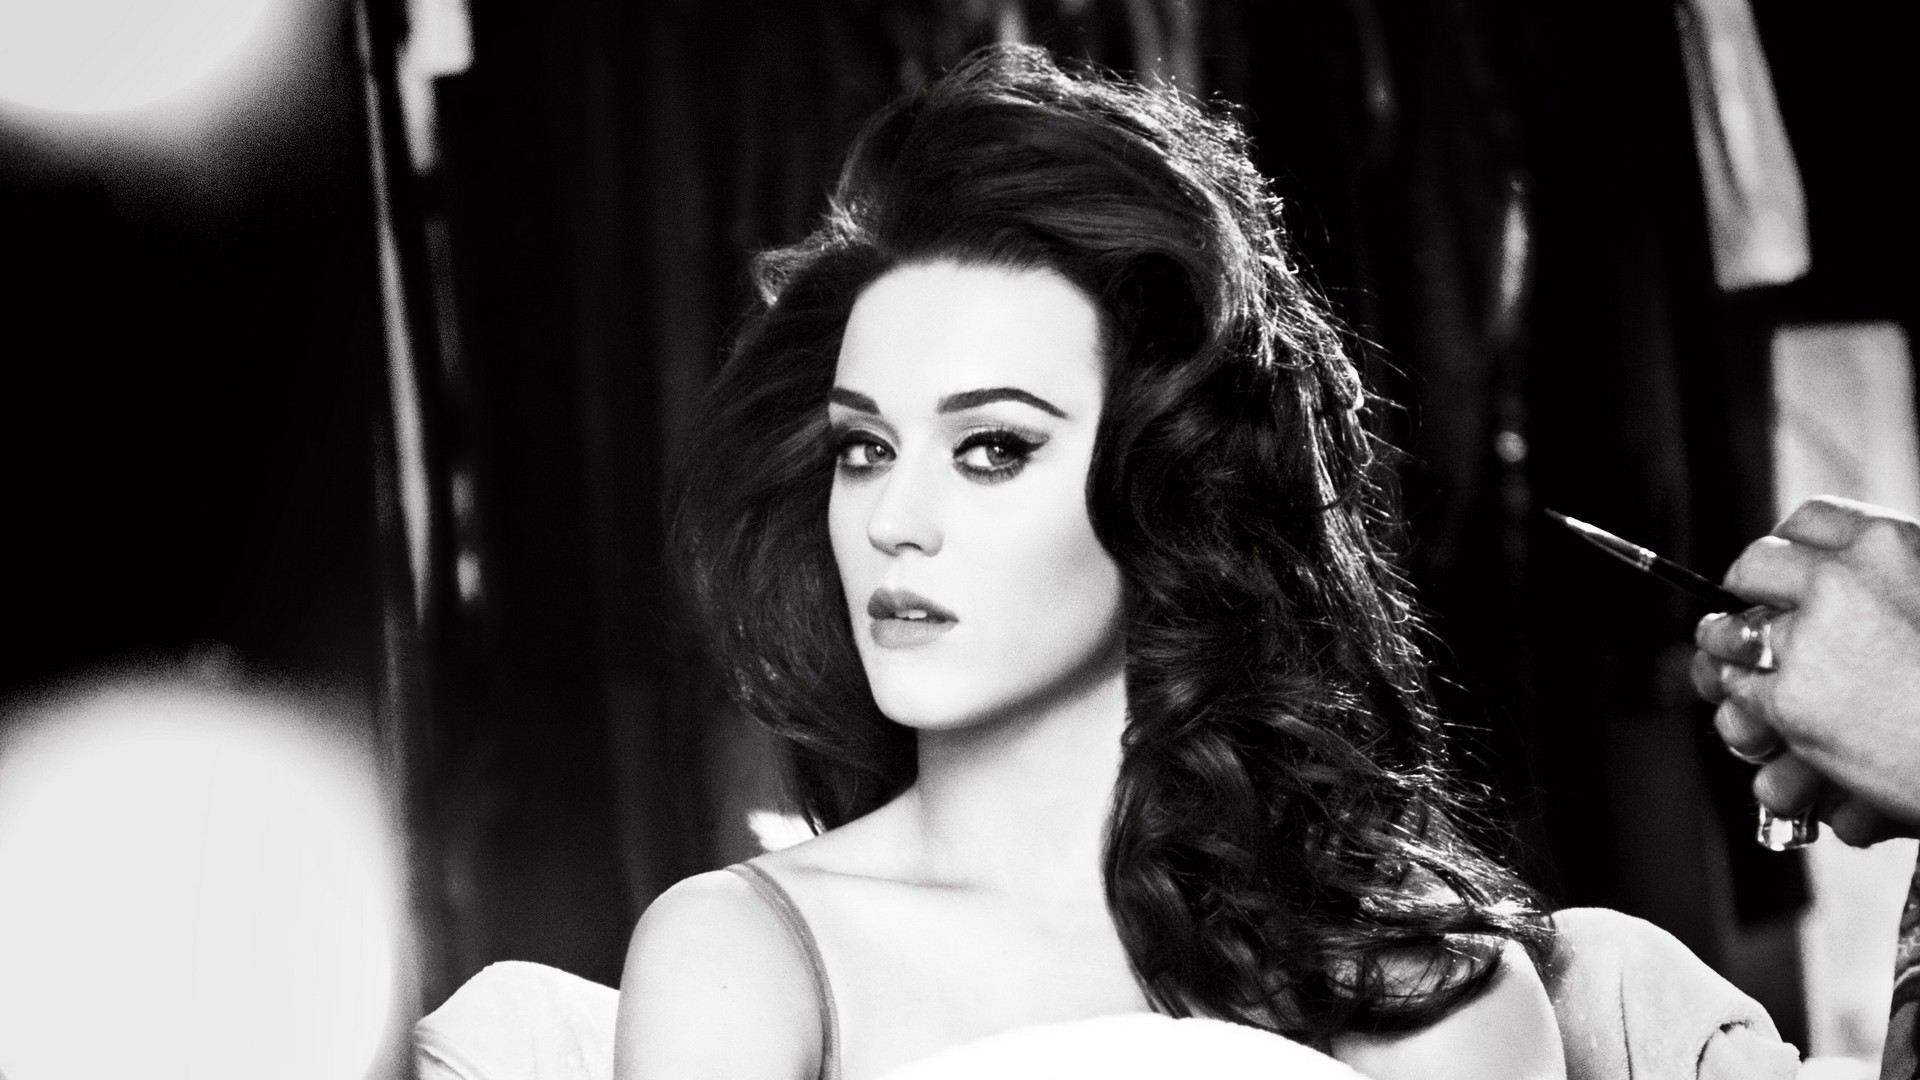 1920x1080 Katy Perry 1080p Wallpapers